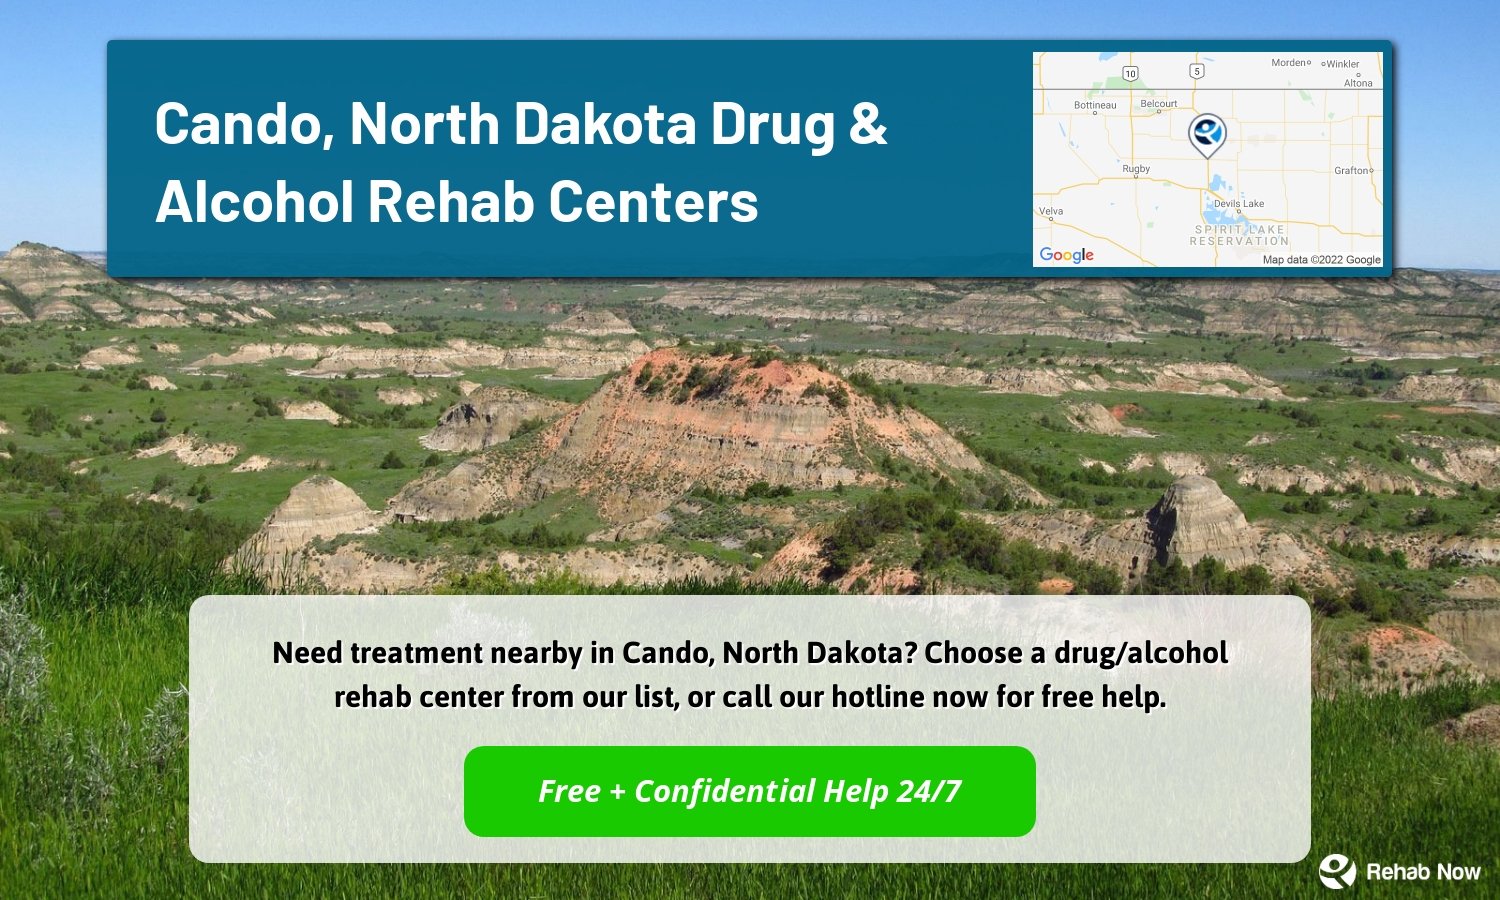 Need treatment nearby in Cando, North Dakota? Choose a drug/alcohol rehab center from our list, or call our hotline now for free help.